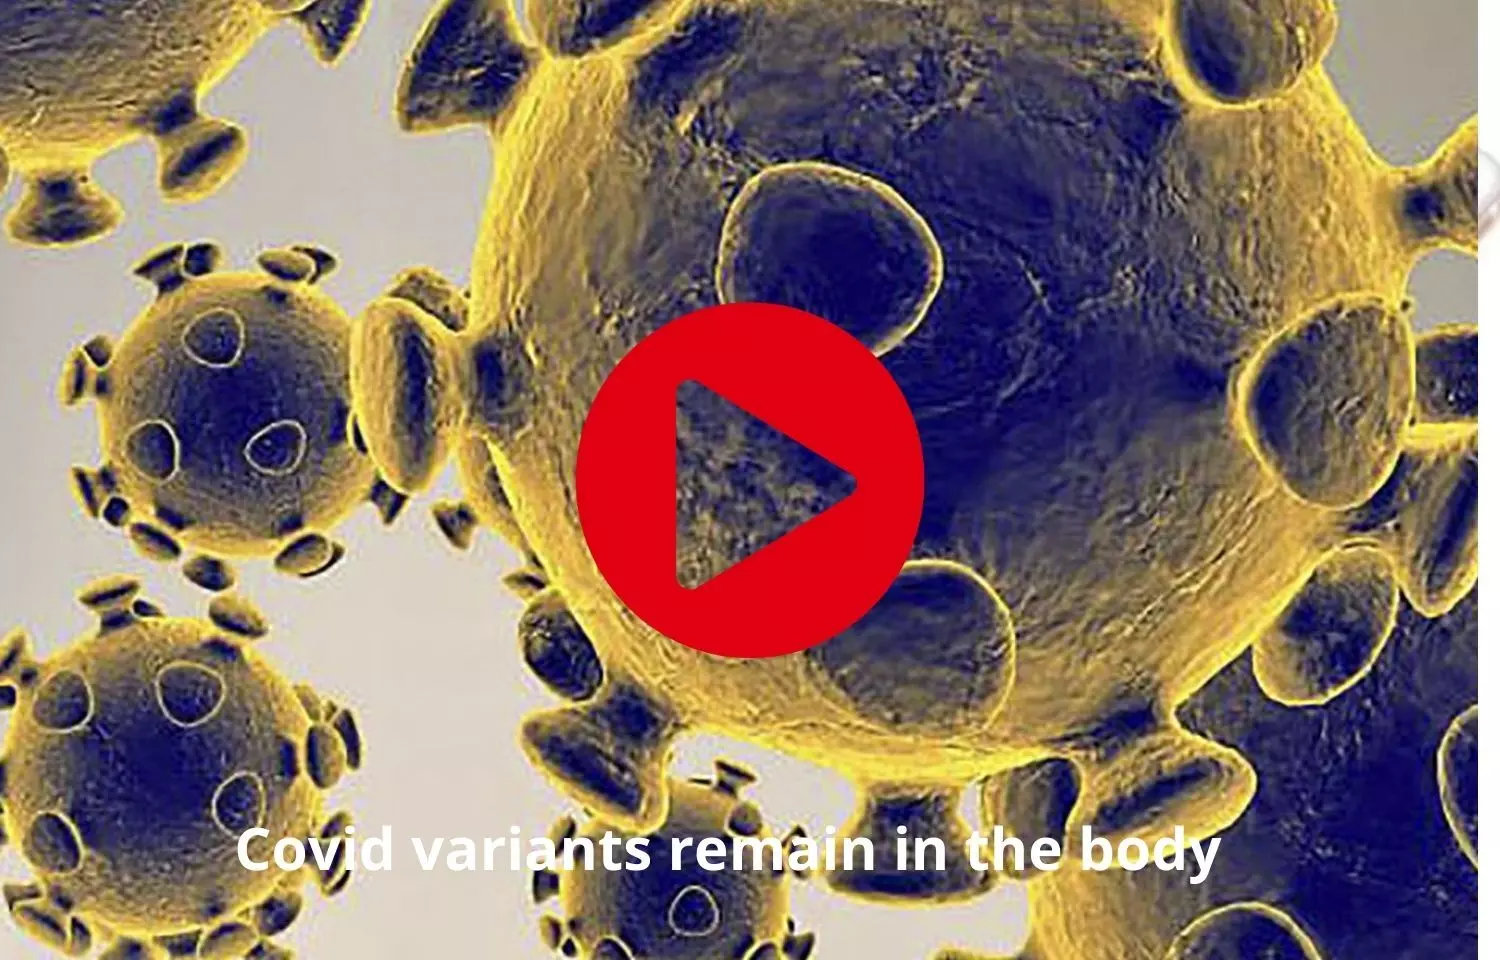 Covid variants to remain and hide in the body